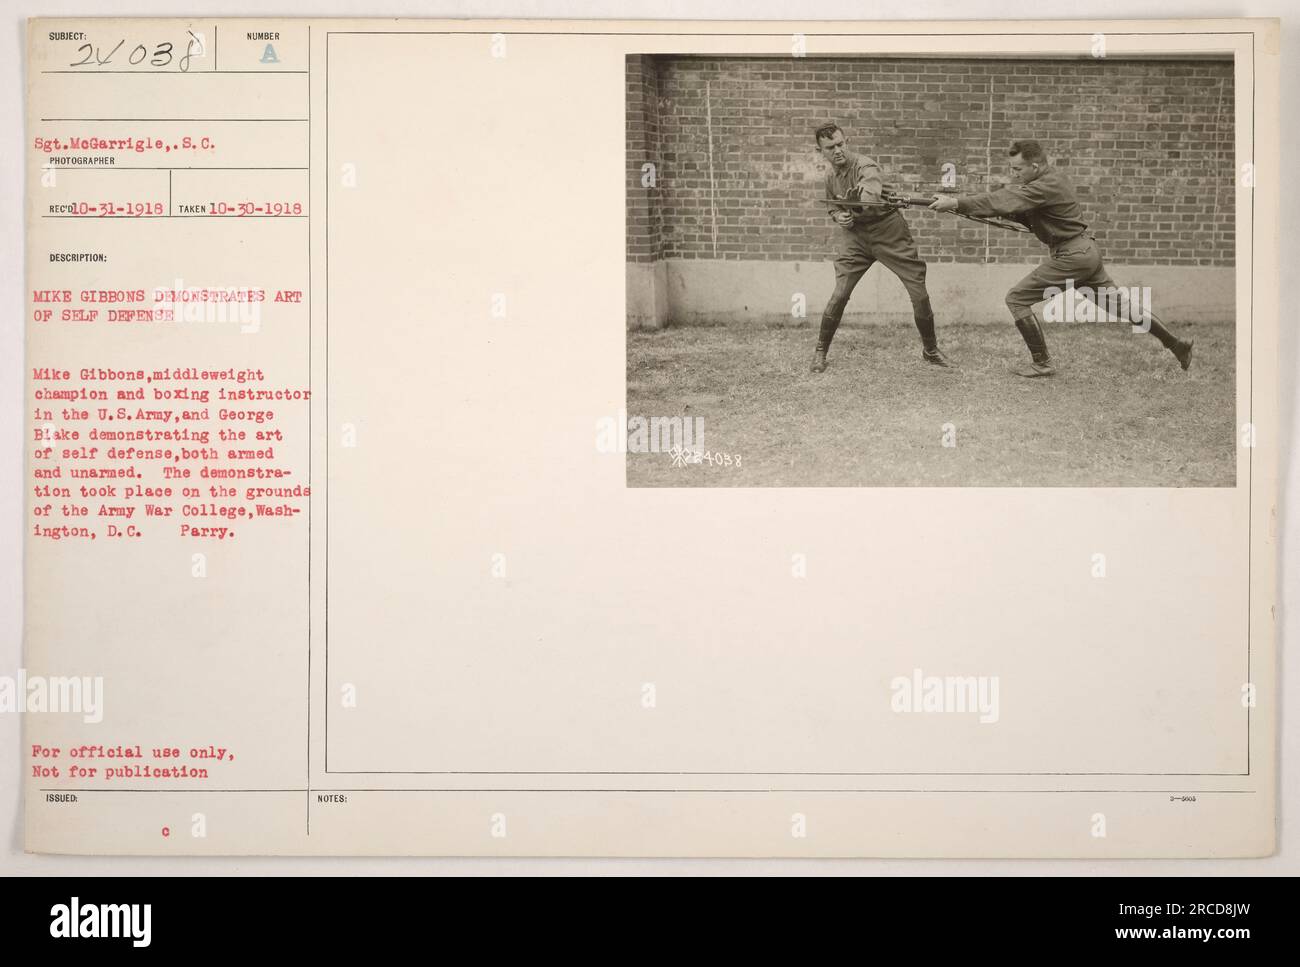 Sgt. MeGarrigle took a photograph on October 30, 1918, depicting Mike Gibbons, a middleweight champion and boxing instructor in the U.S. Army, along with George Blake, demonstrating self-defense techniques, both armed and unarmed. The demonstration occurred at the Army War College in Washington, D.C. This photograph is labeled as 111-SC-24038. Stock Photo